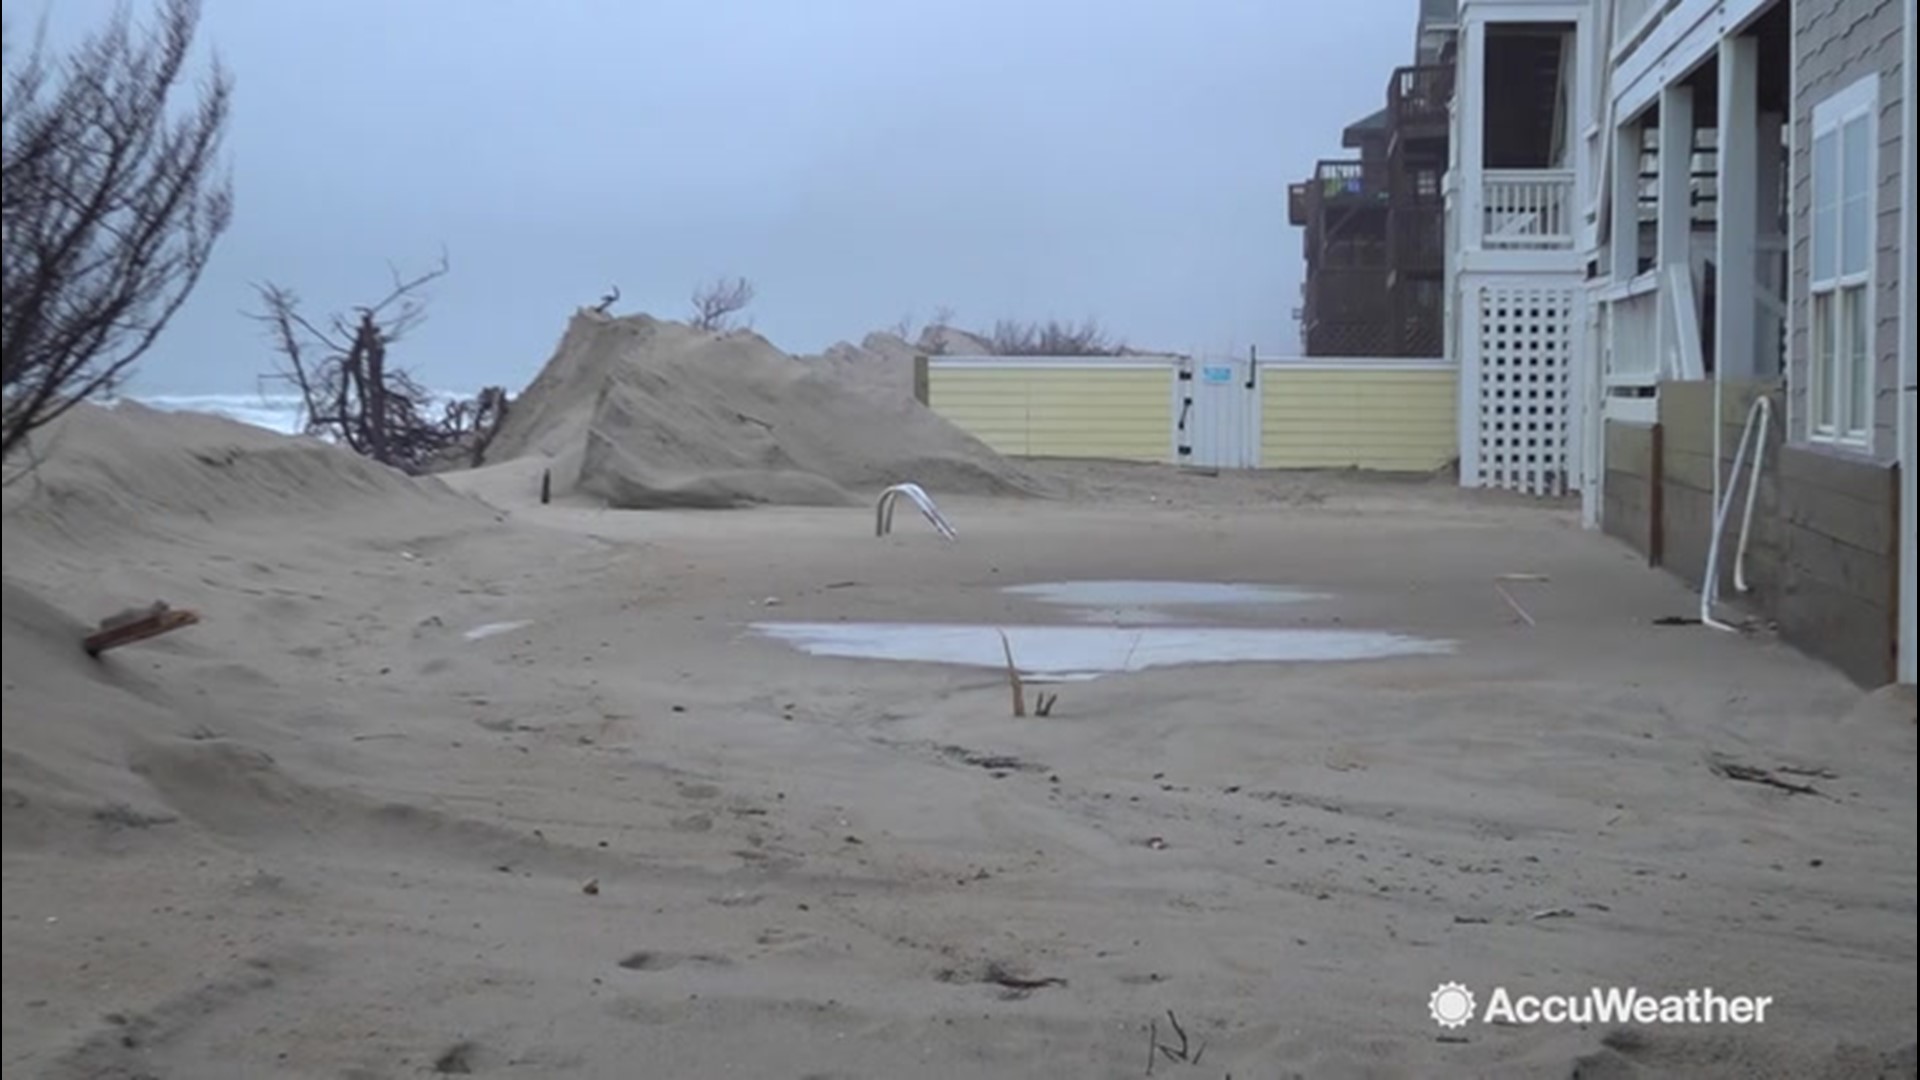 Near Cape Hatteras, North Carolina, preparations for another coastal storm were already in place by Nov. 15. Jonathan Petramala has the details.